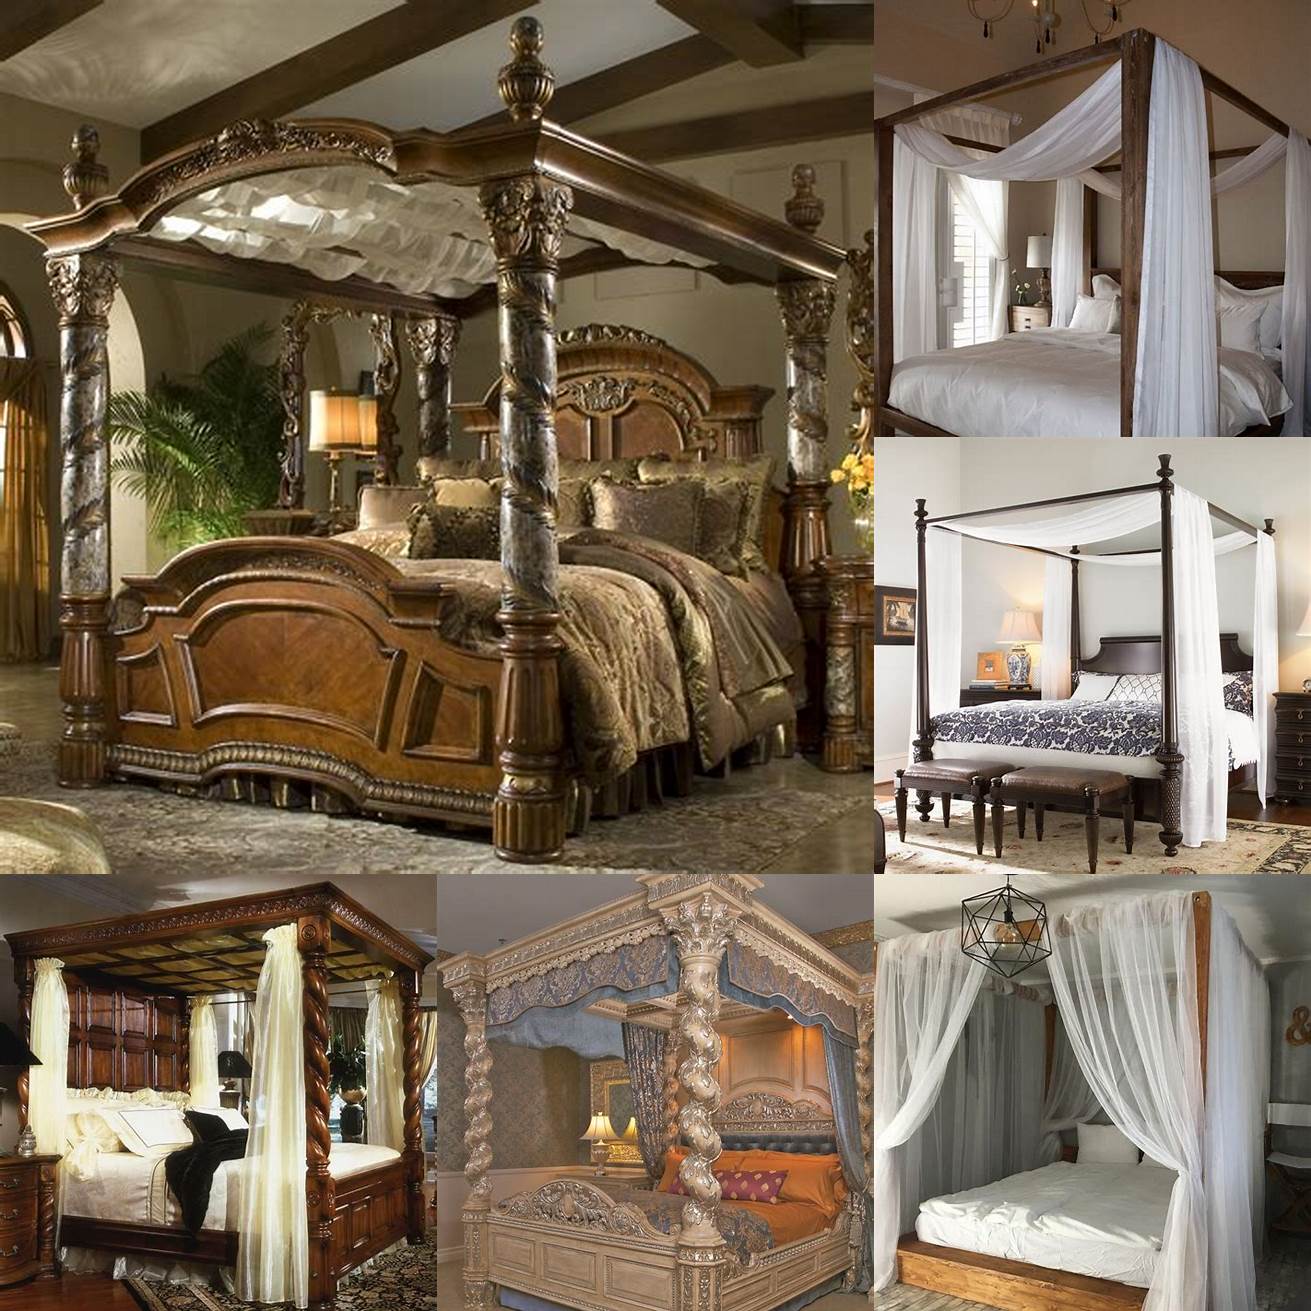 A dramatic and romantic Canopy Eastern King Bed with a frame that supports a canopy